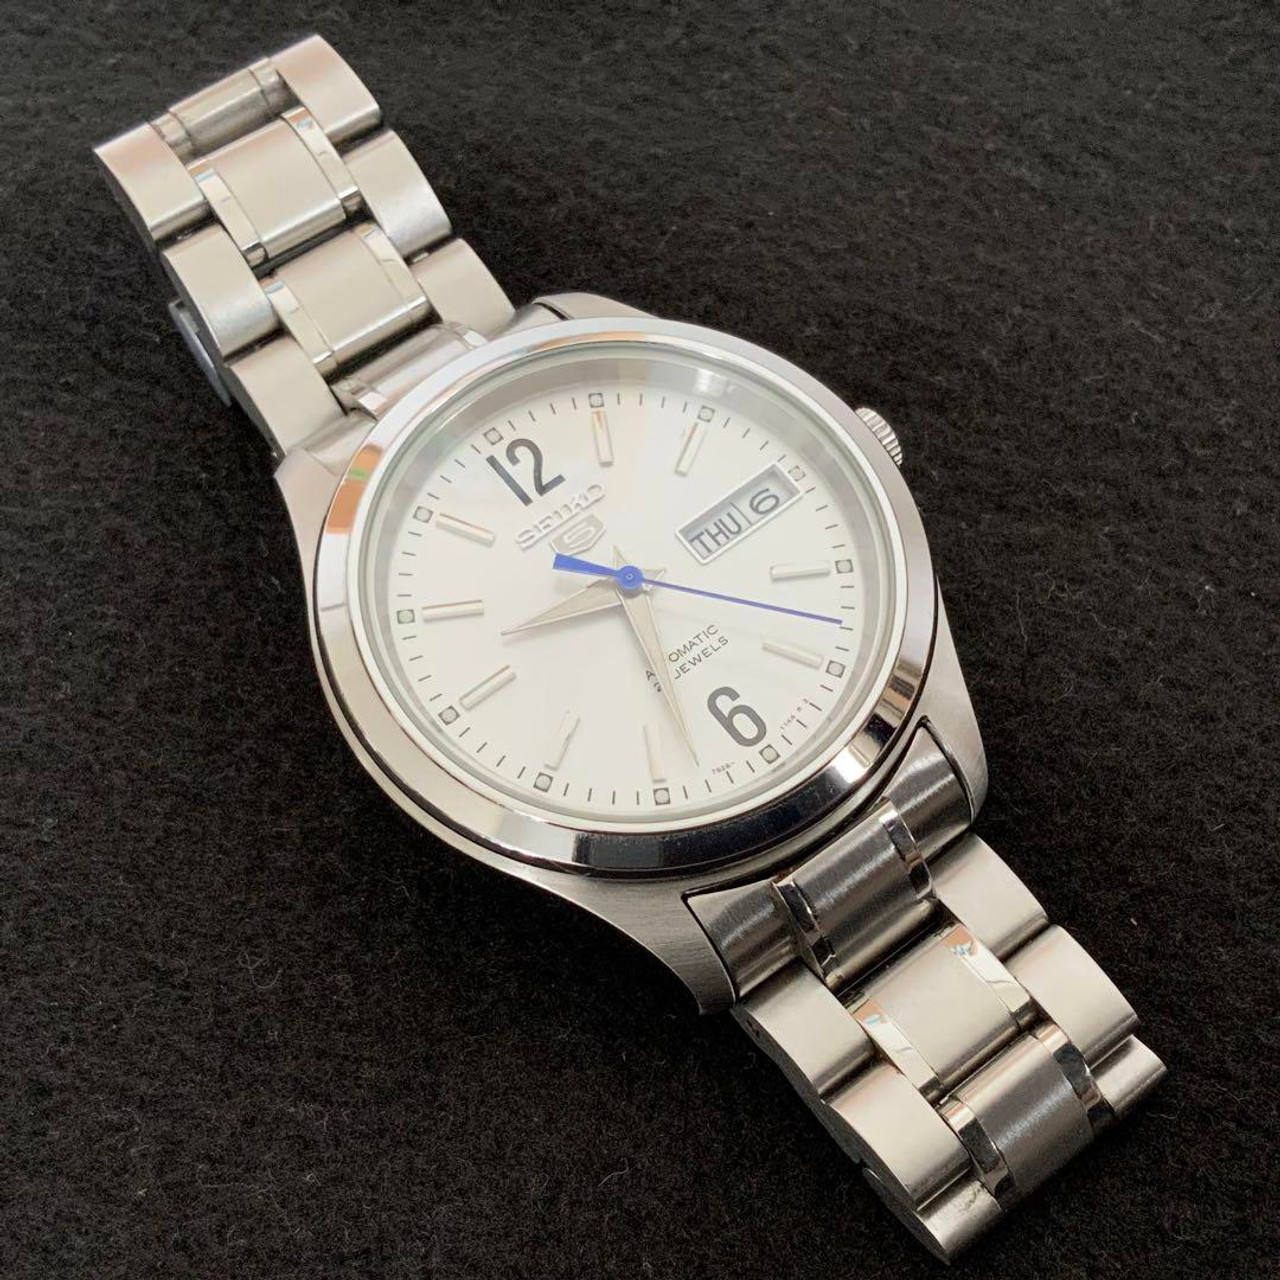 Seiko Seiko 5 SNKM55 7S26-03W0 Stainless Steel 21 Jewels Automatic Mens  Watch - Japan Pre-owned Vintage